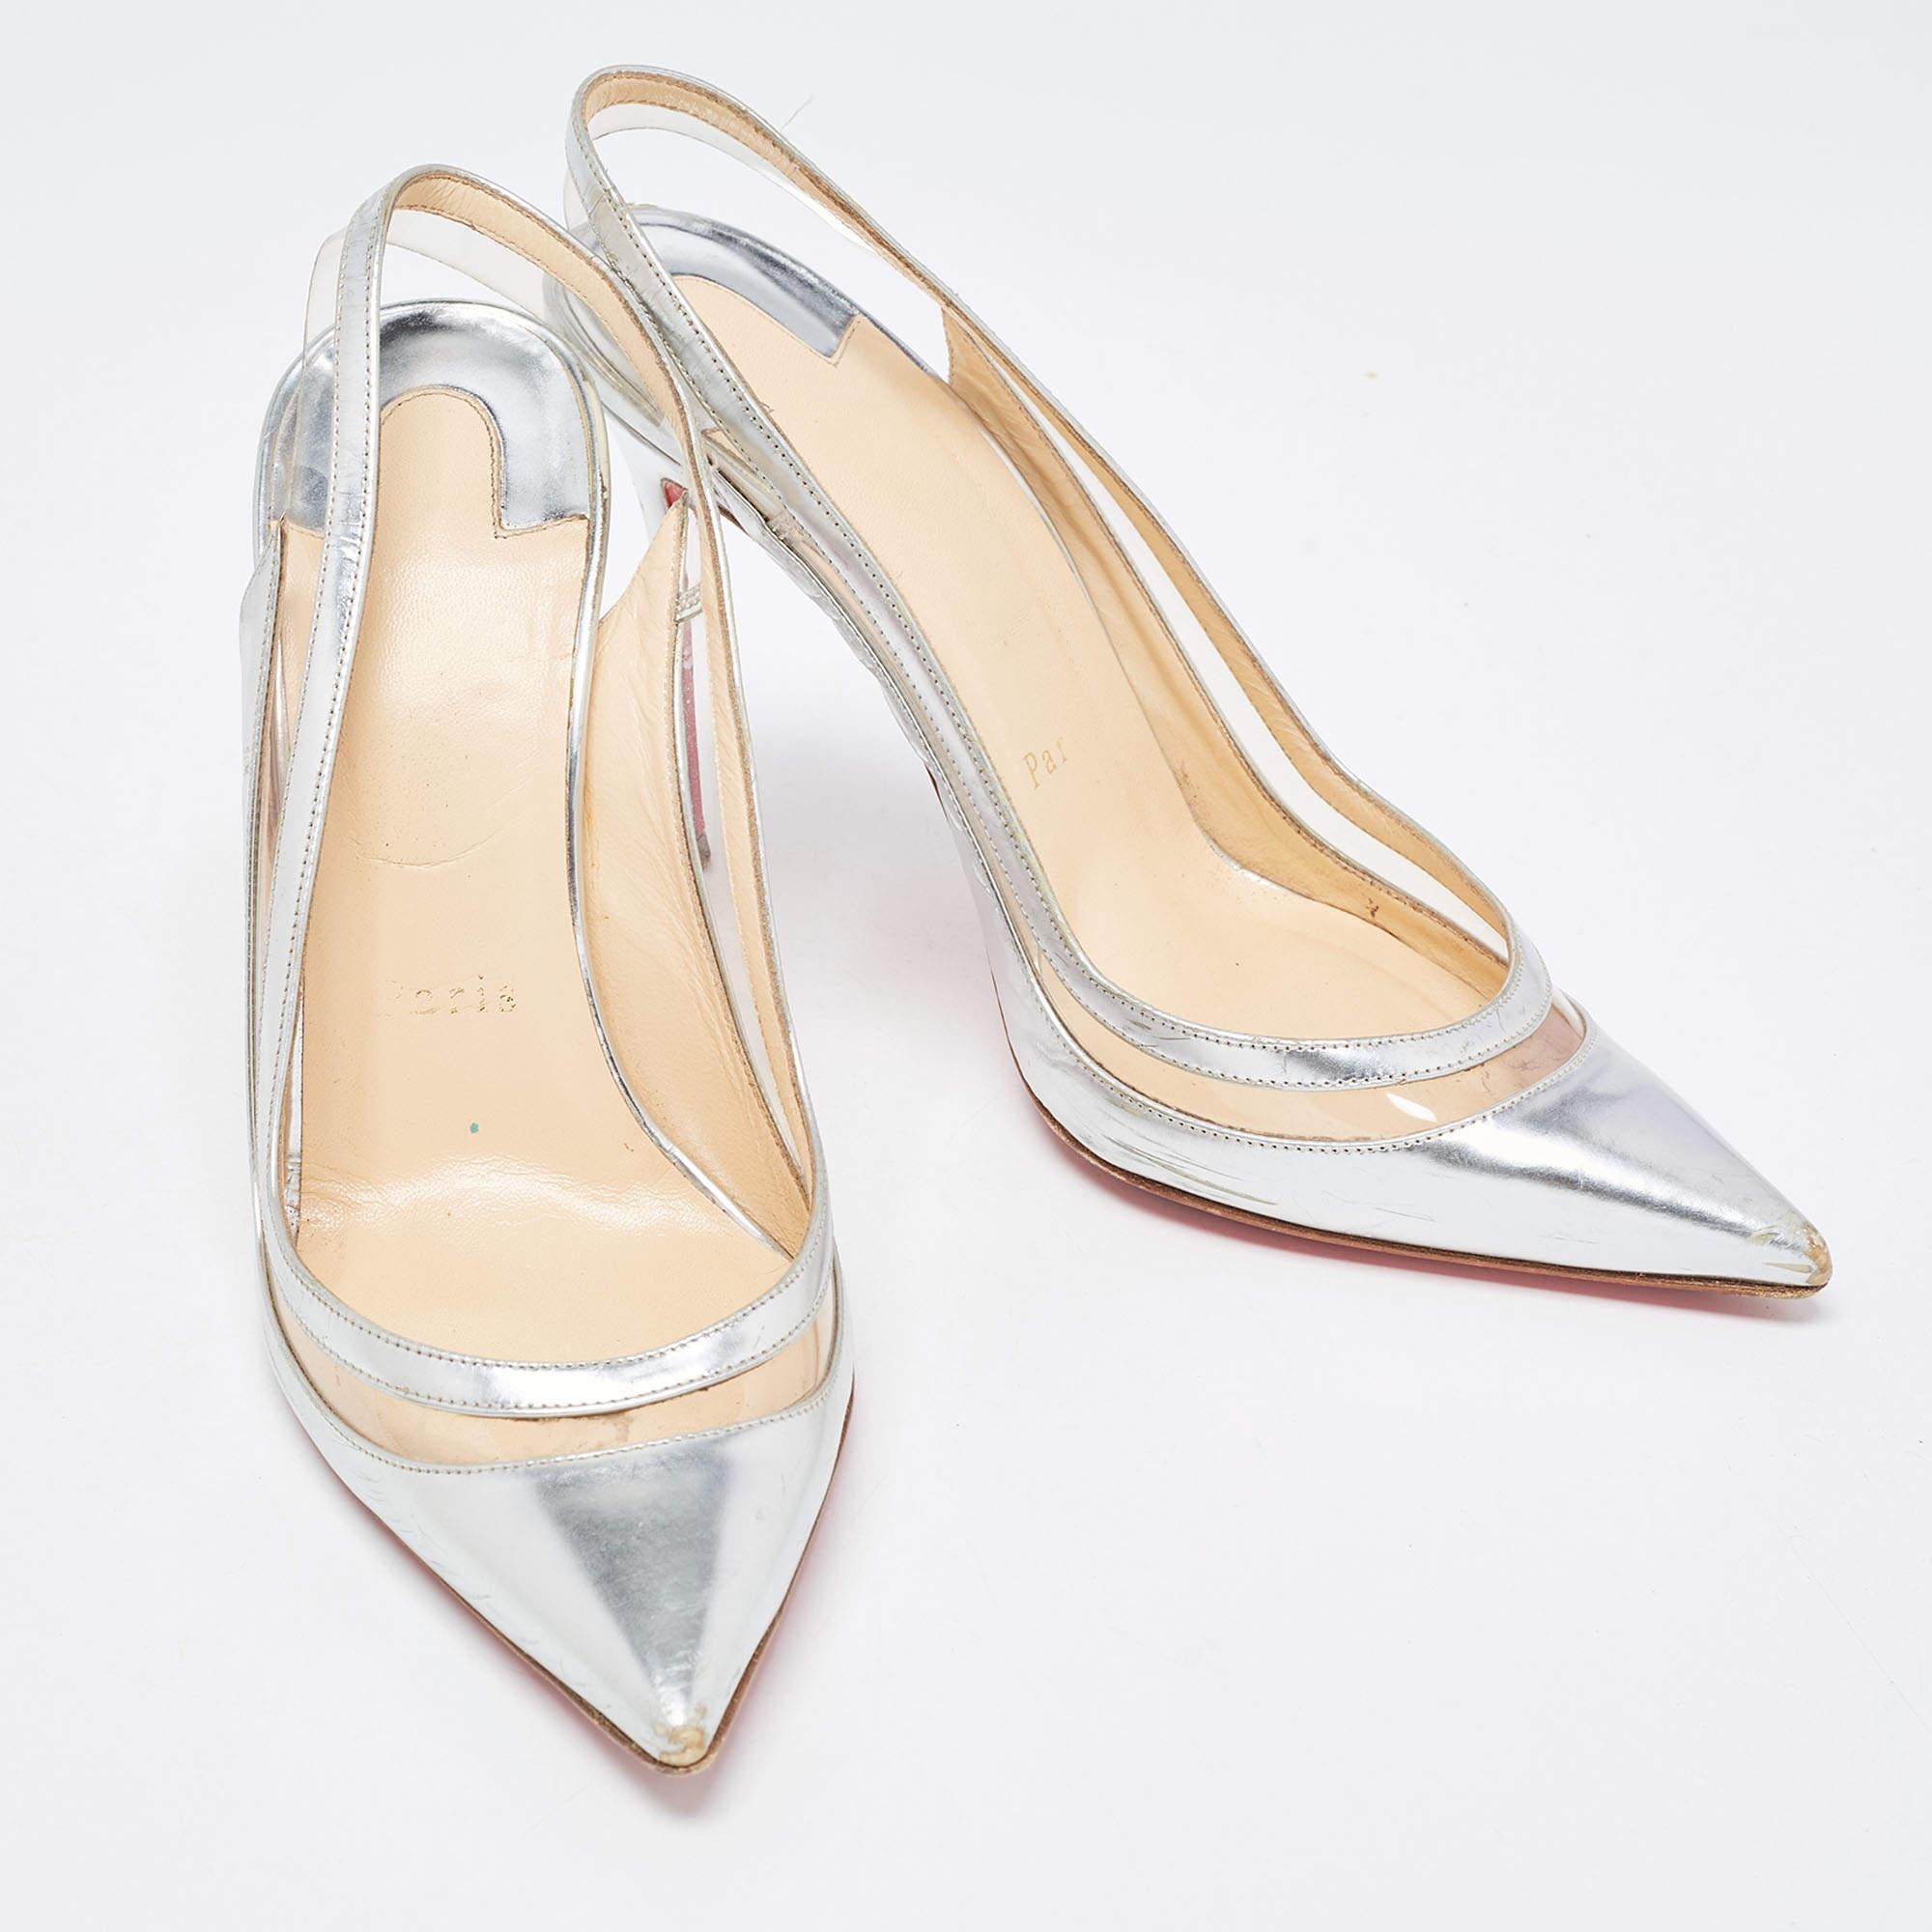 Christian Louboutin Silver Leather and PVC Paulina Slingback Pumps Size 37.5 In Good Condition For Sale In Dubai, Al Qouz 2